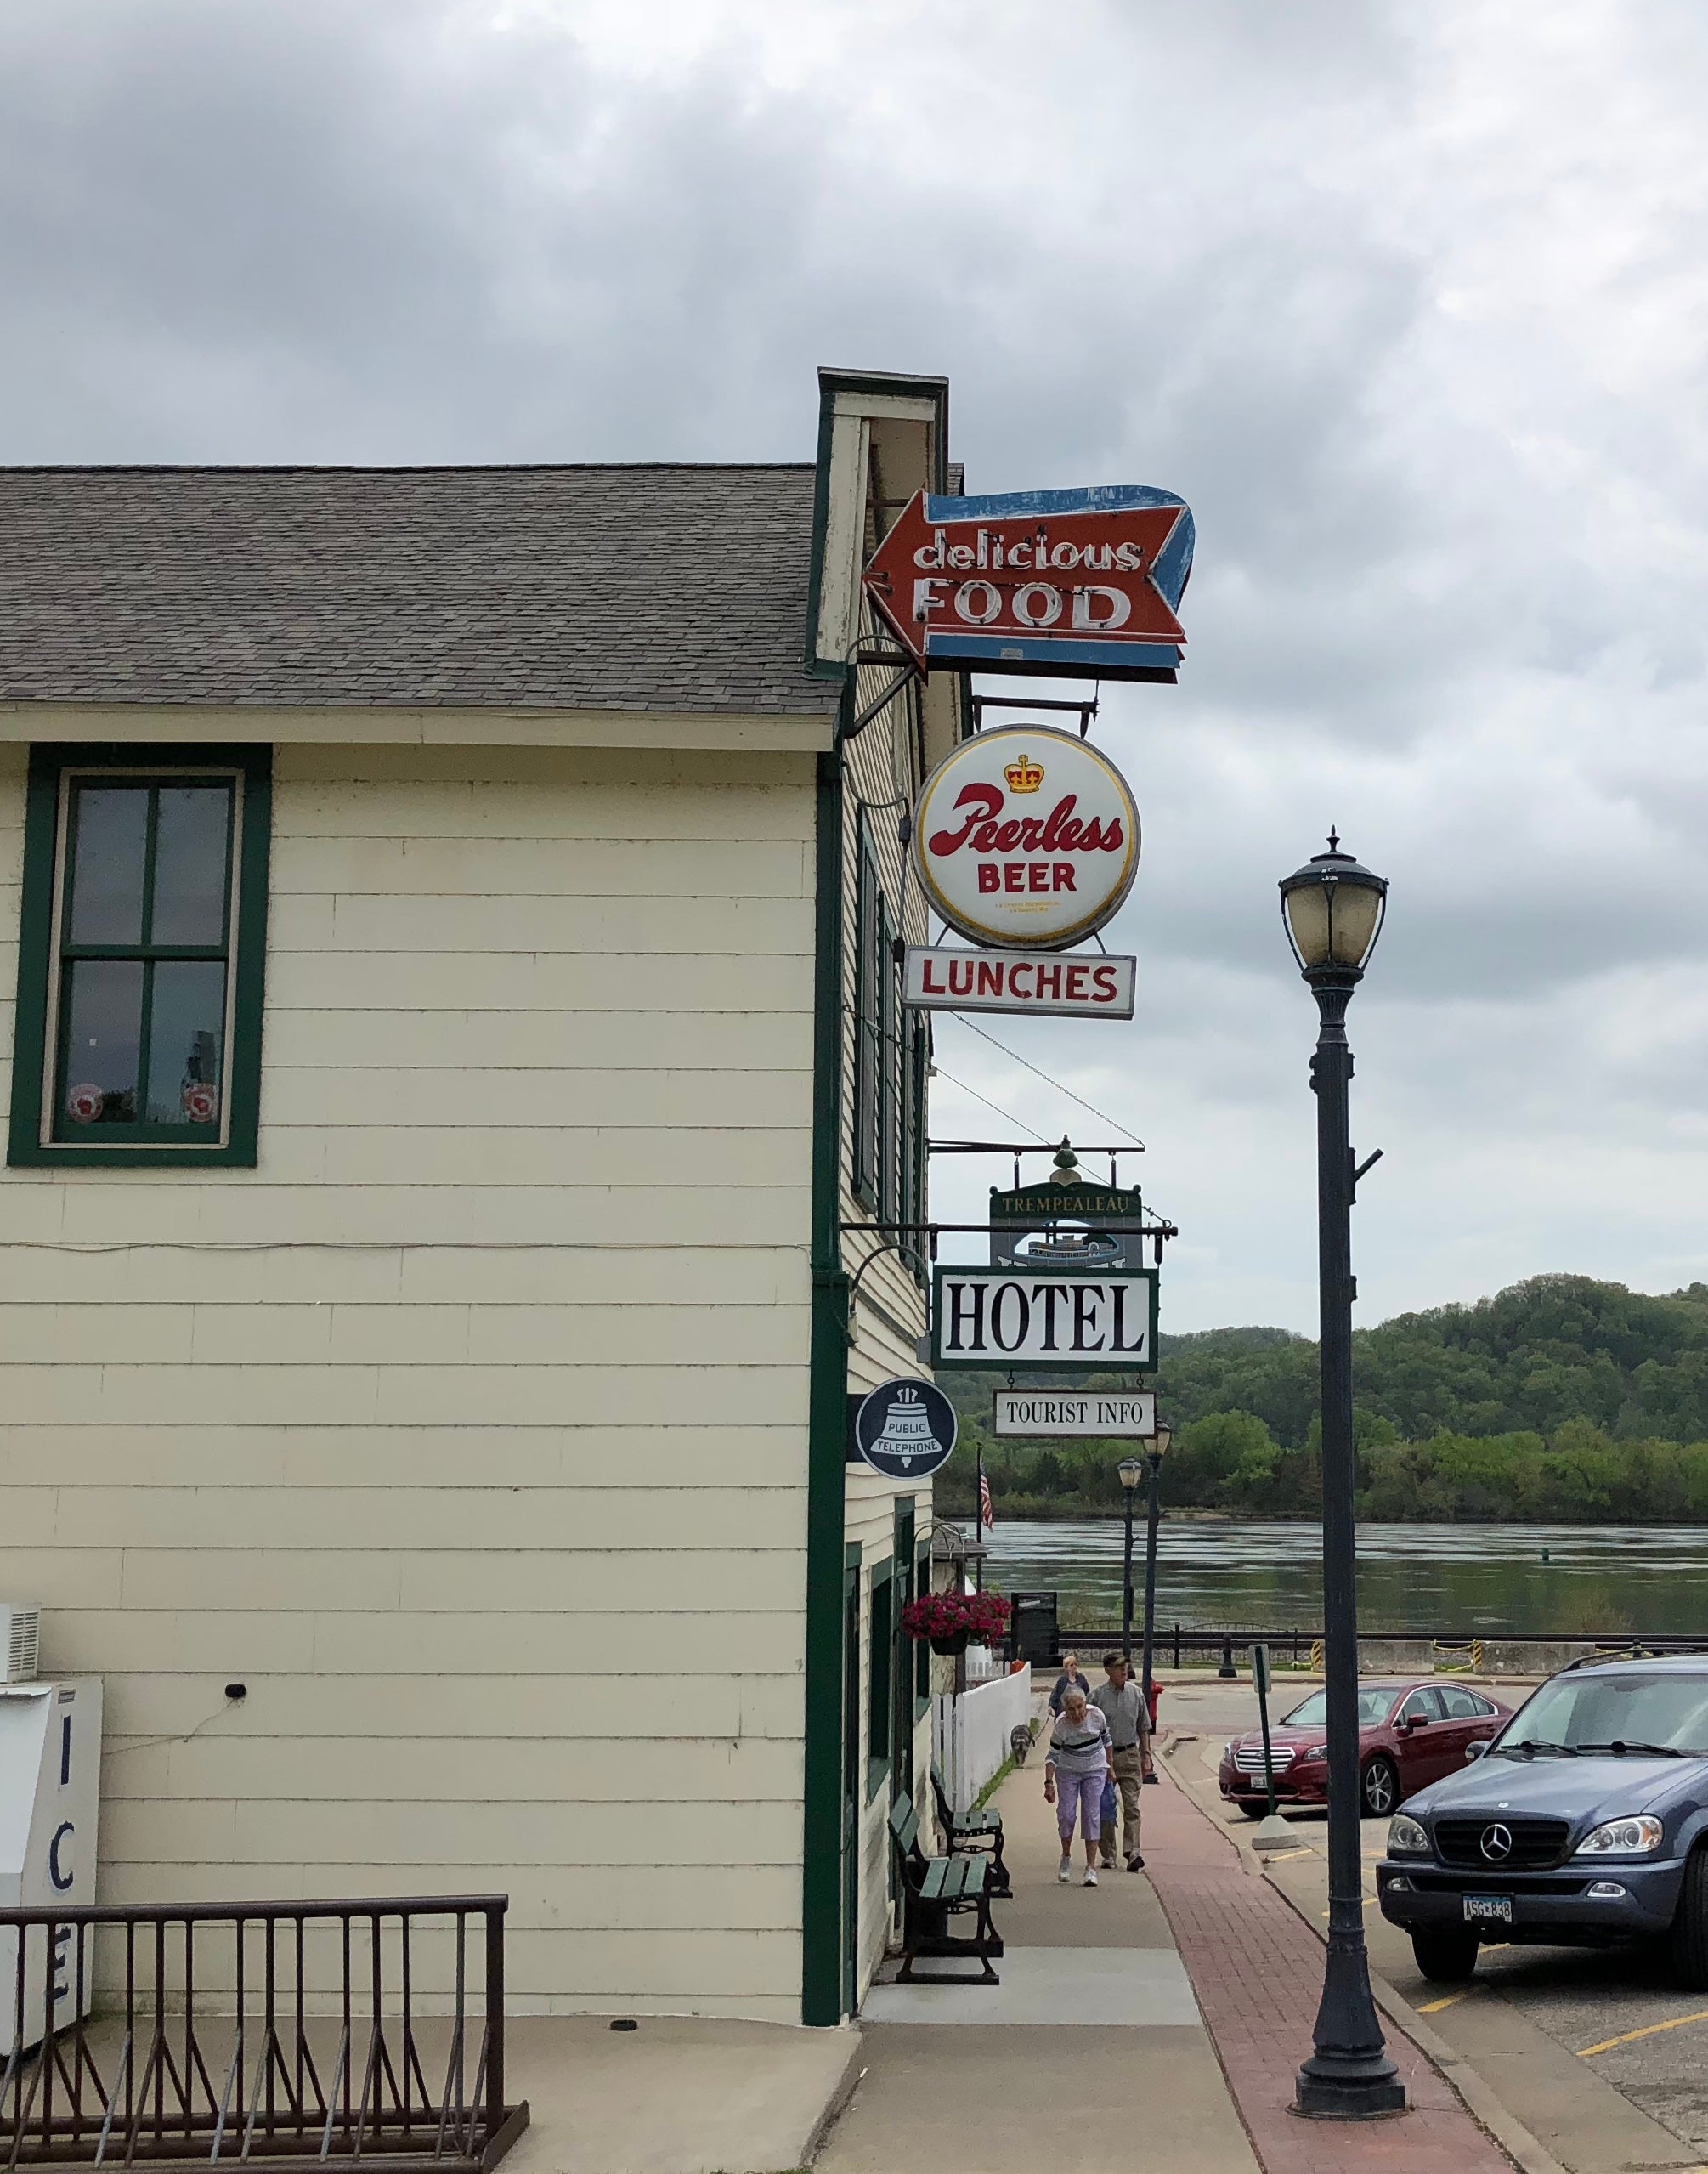 The small town of Trempealeau is nearby with a few restaurants and bars